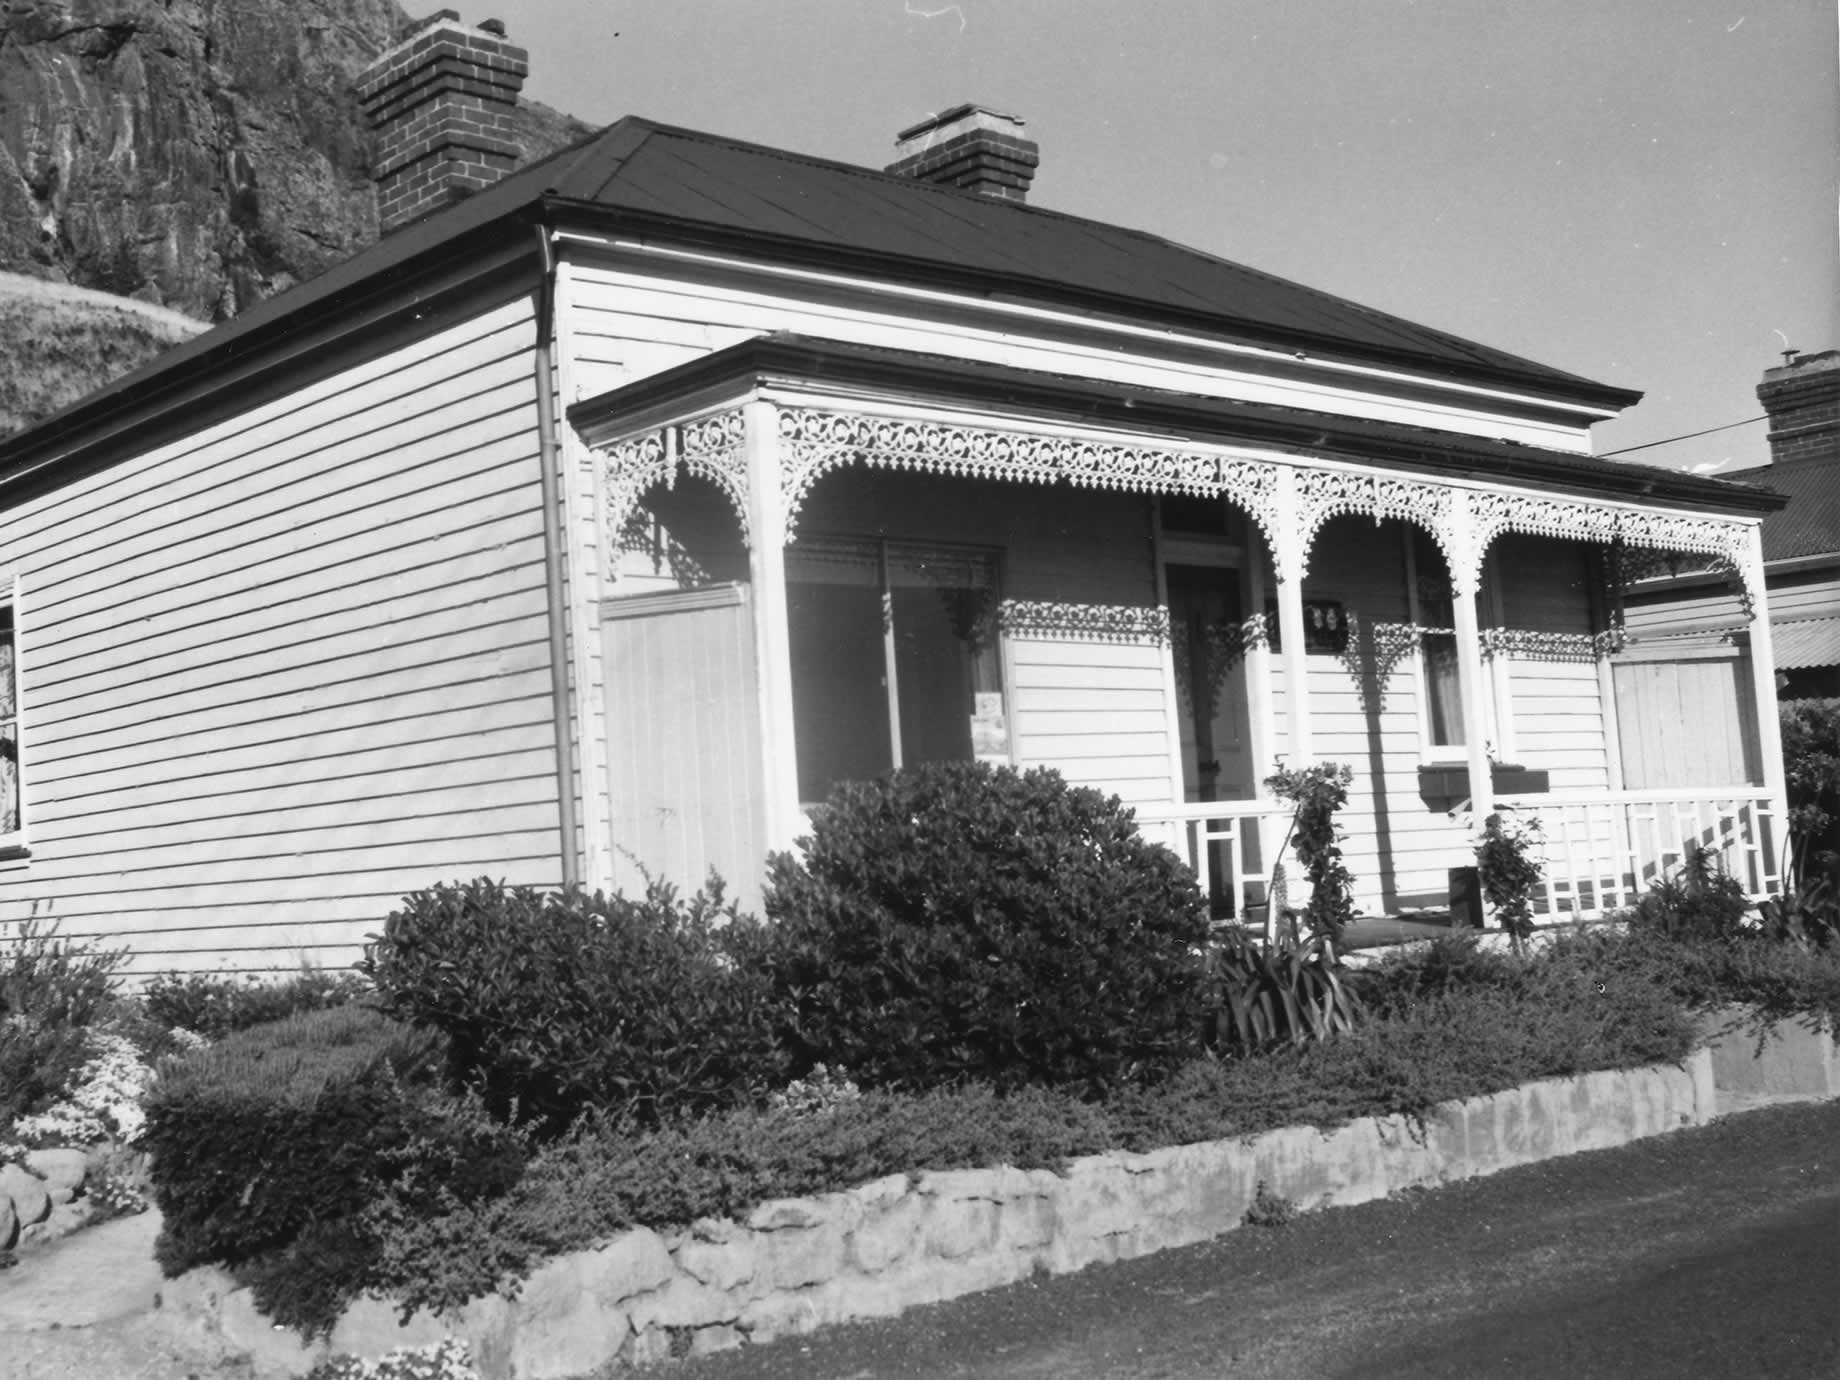 Gull Cottage, 1970, later to become the home of historian Meg Eldridge